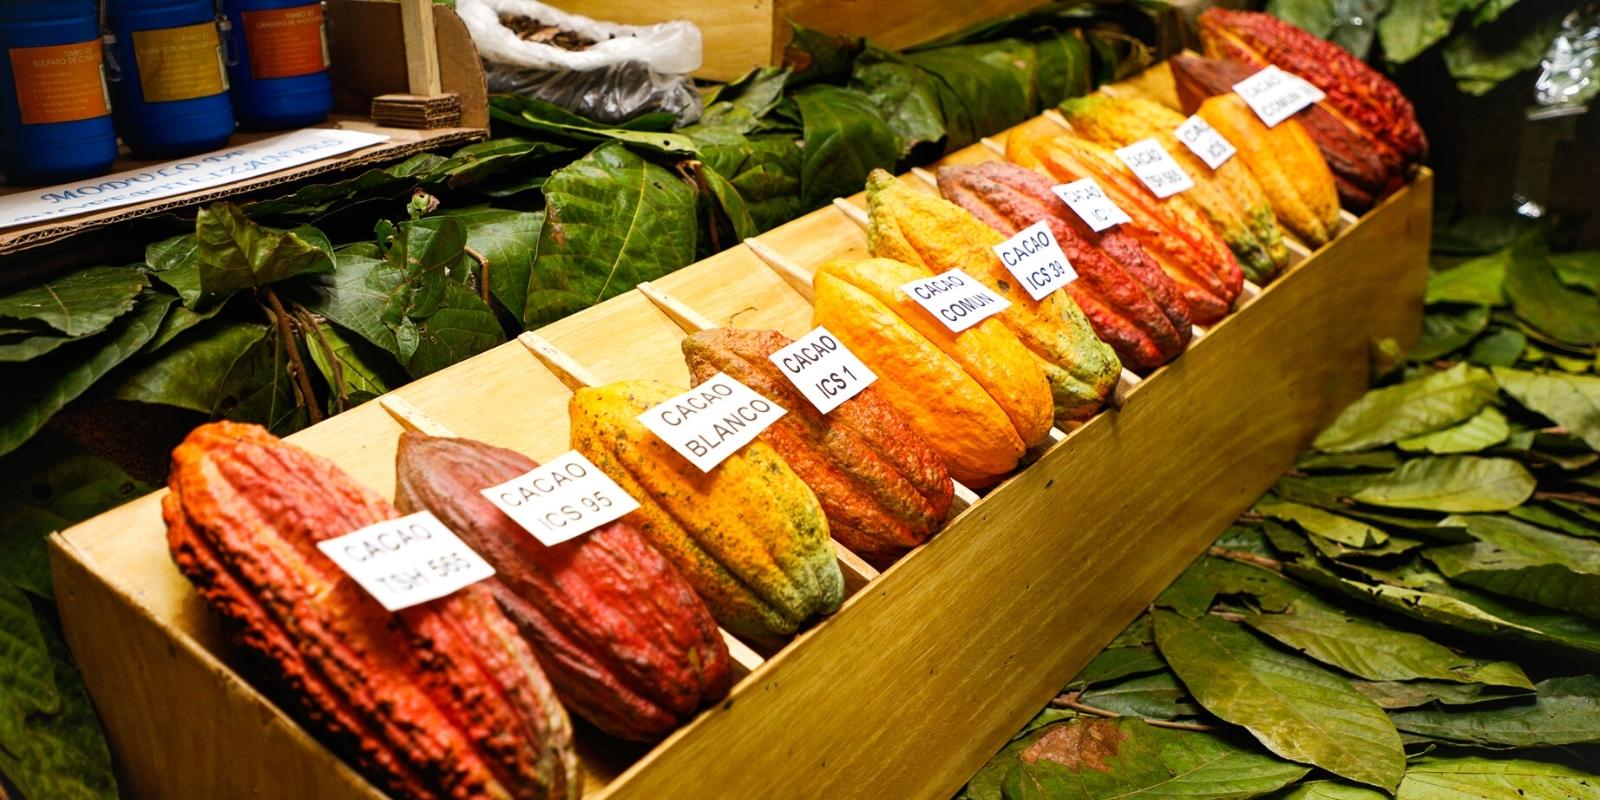 10 best souvenirs of Peru you should to buy, cacao